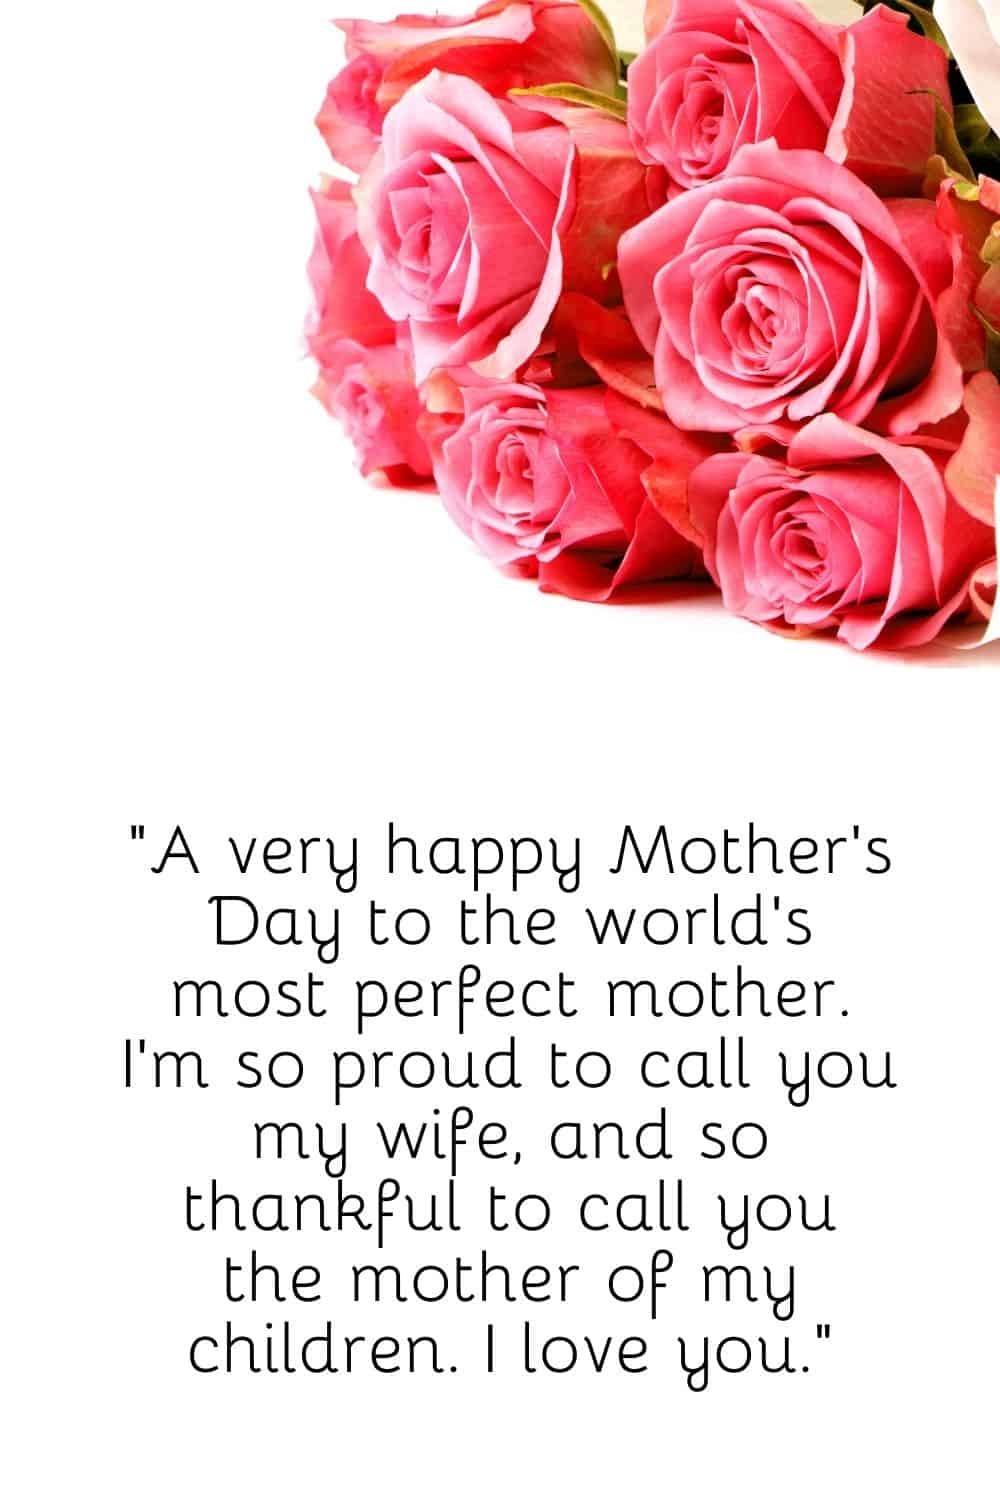 Mother's Day wishes for a friend